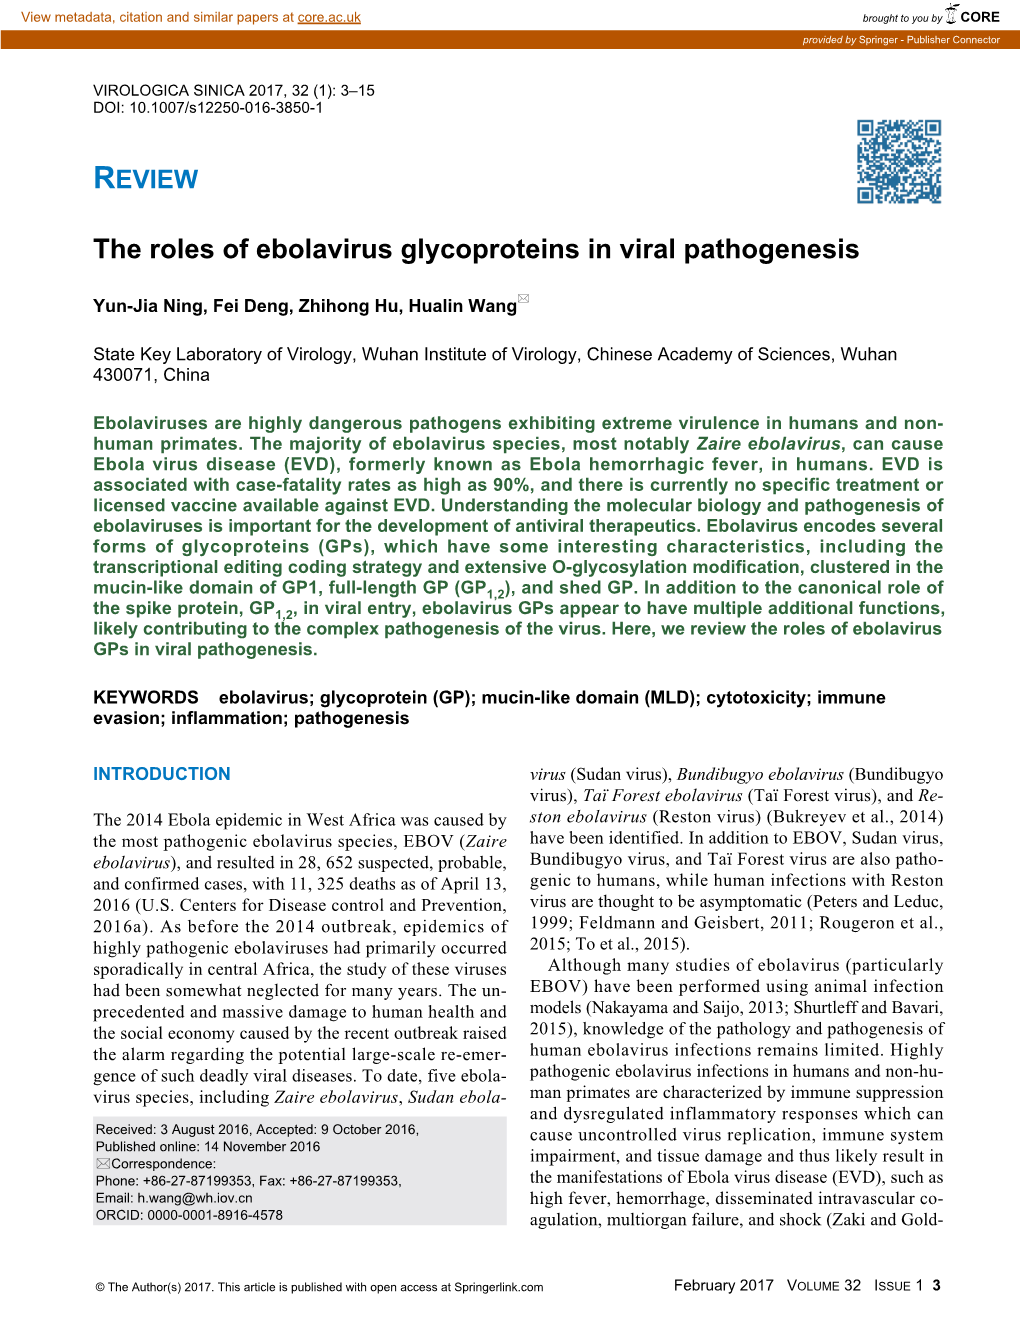 The Roles of Ebolavirus Glycoproteins in Viral Pathogenesis